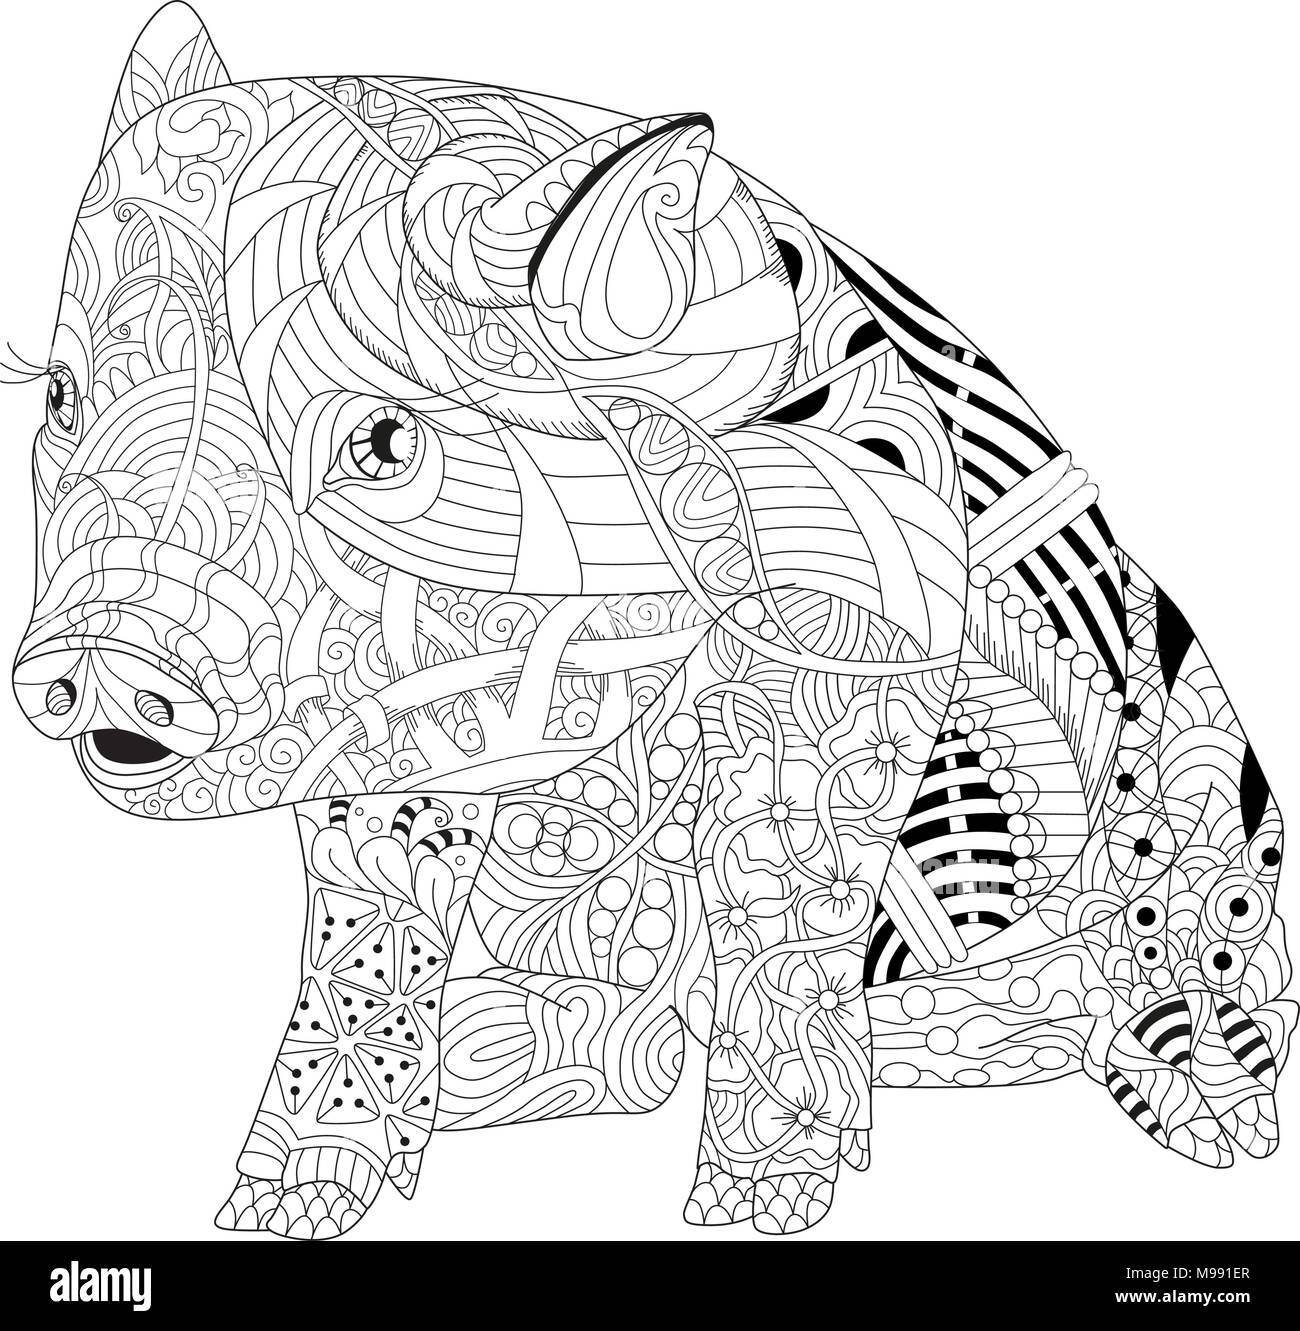 Zentangle illustration with pig. Zentangle or doodle piglet. Coloring book domestic animal. Stock Vector